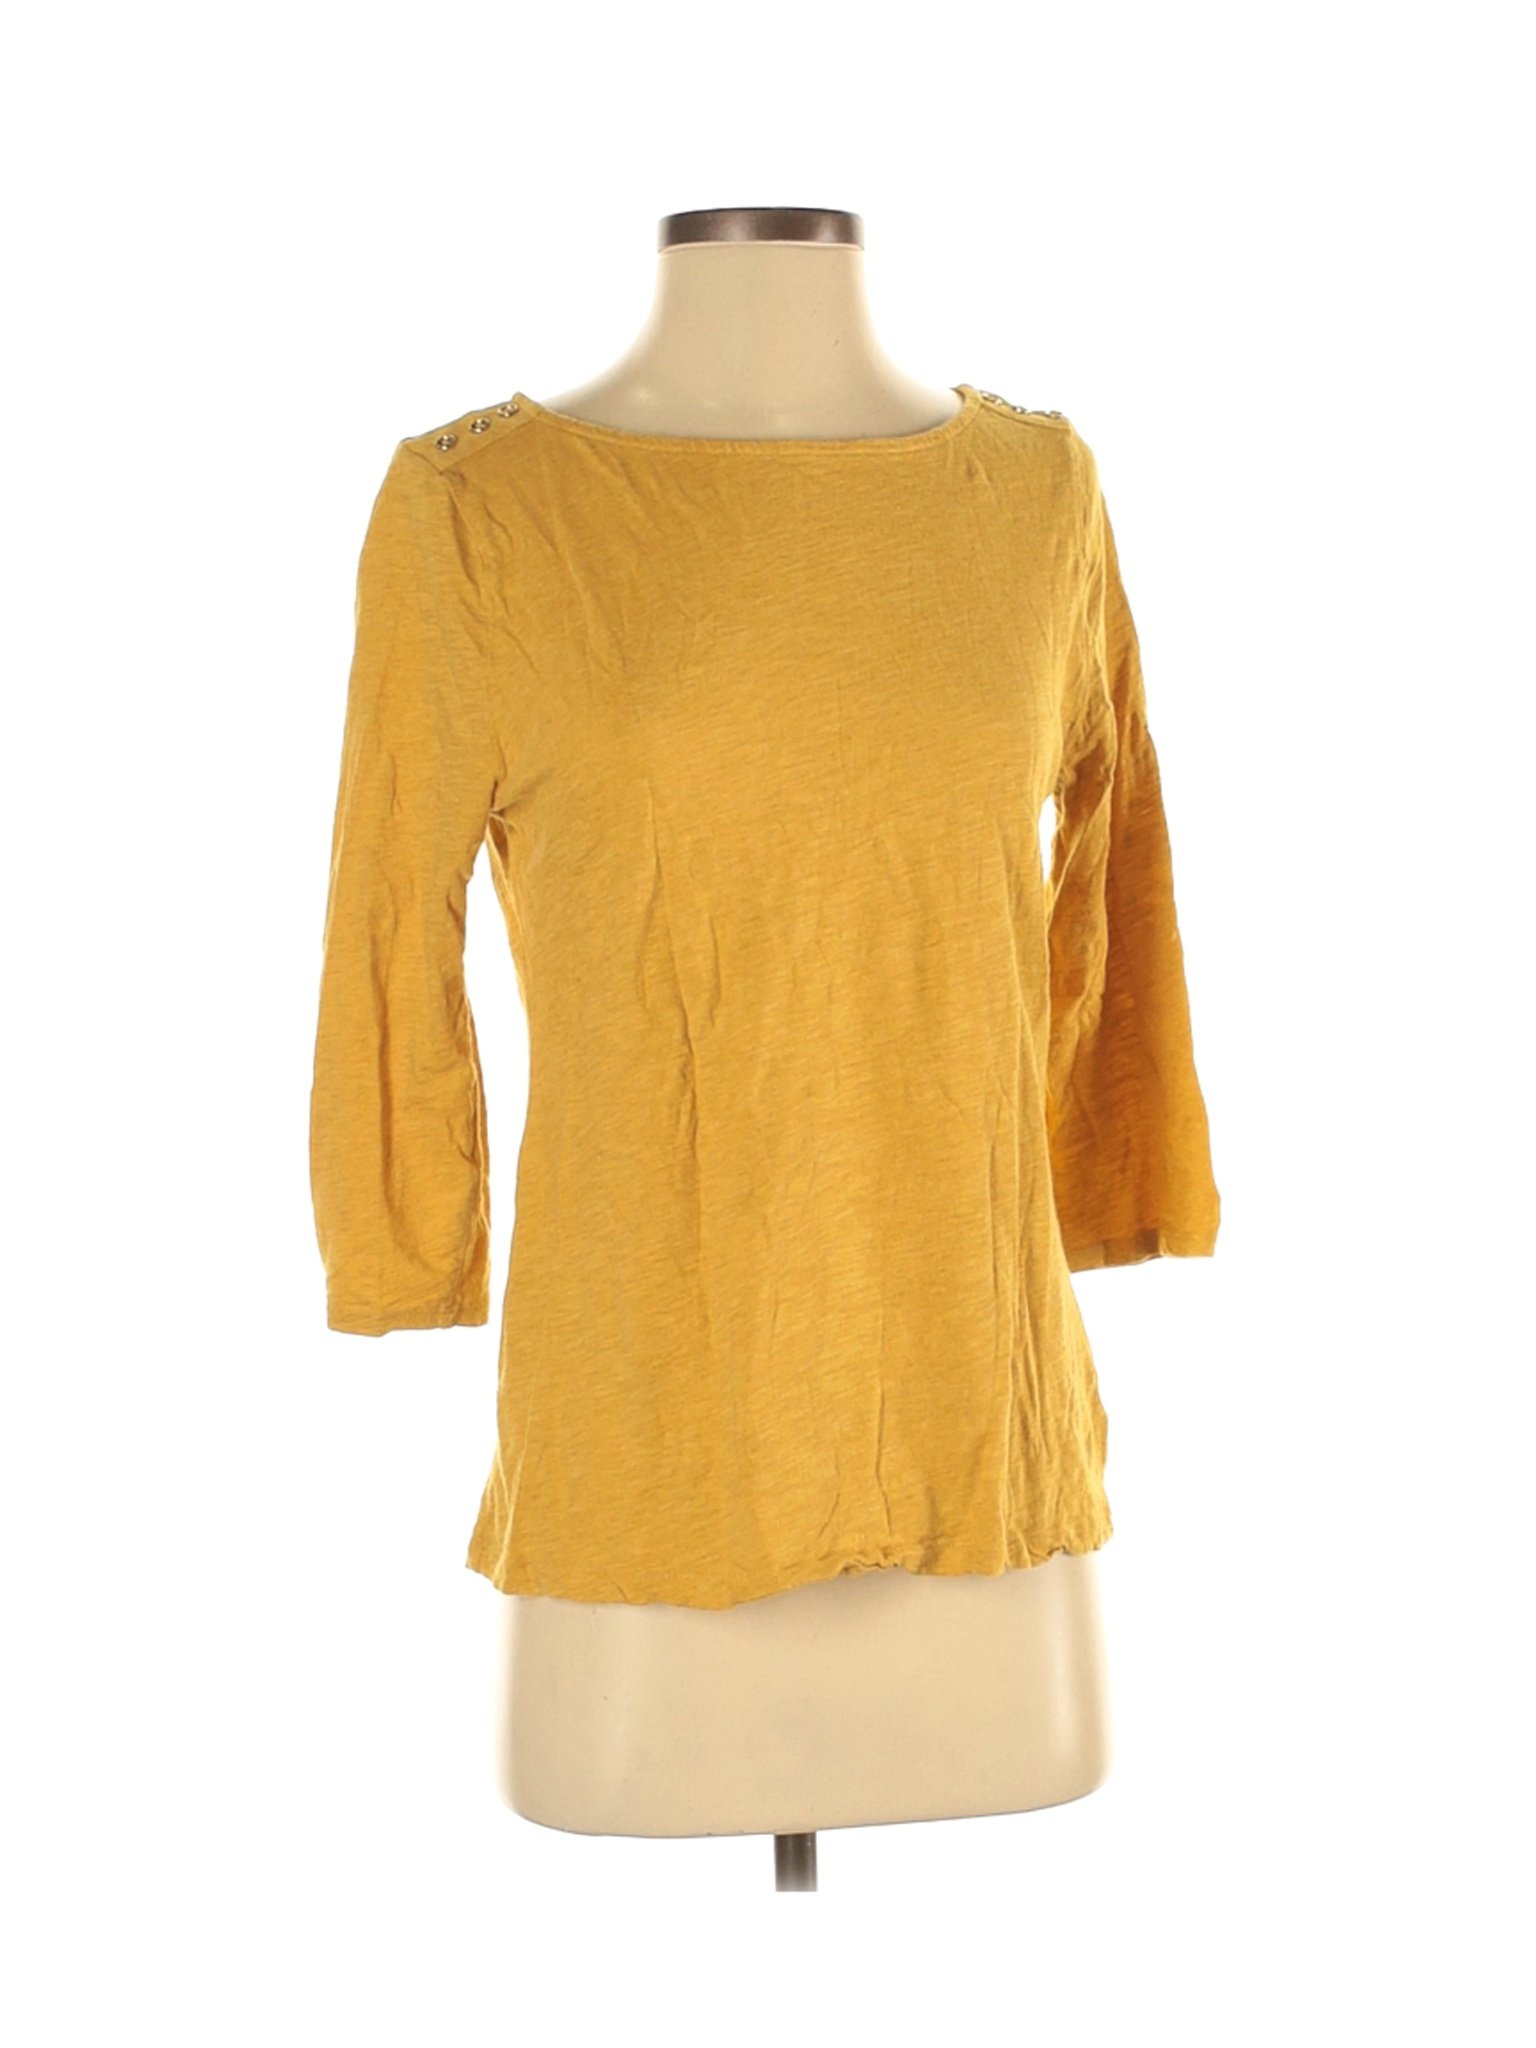 A New Day Women Yellow 3/4 Sleeve Top M | eBay